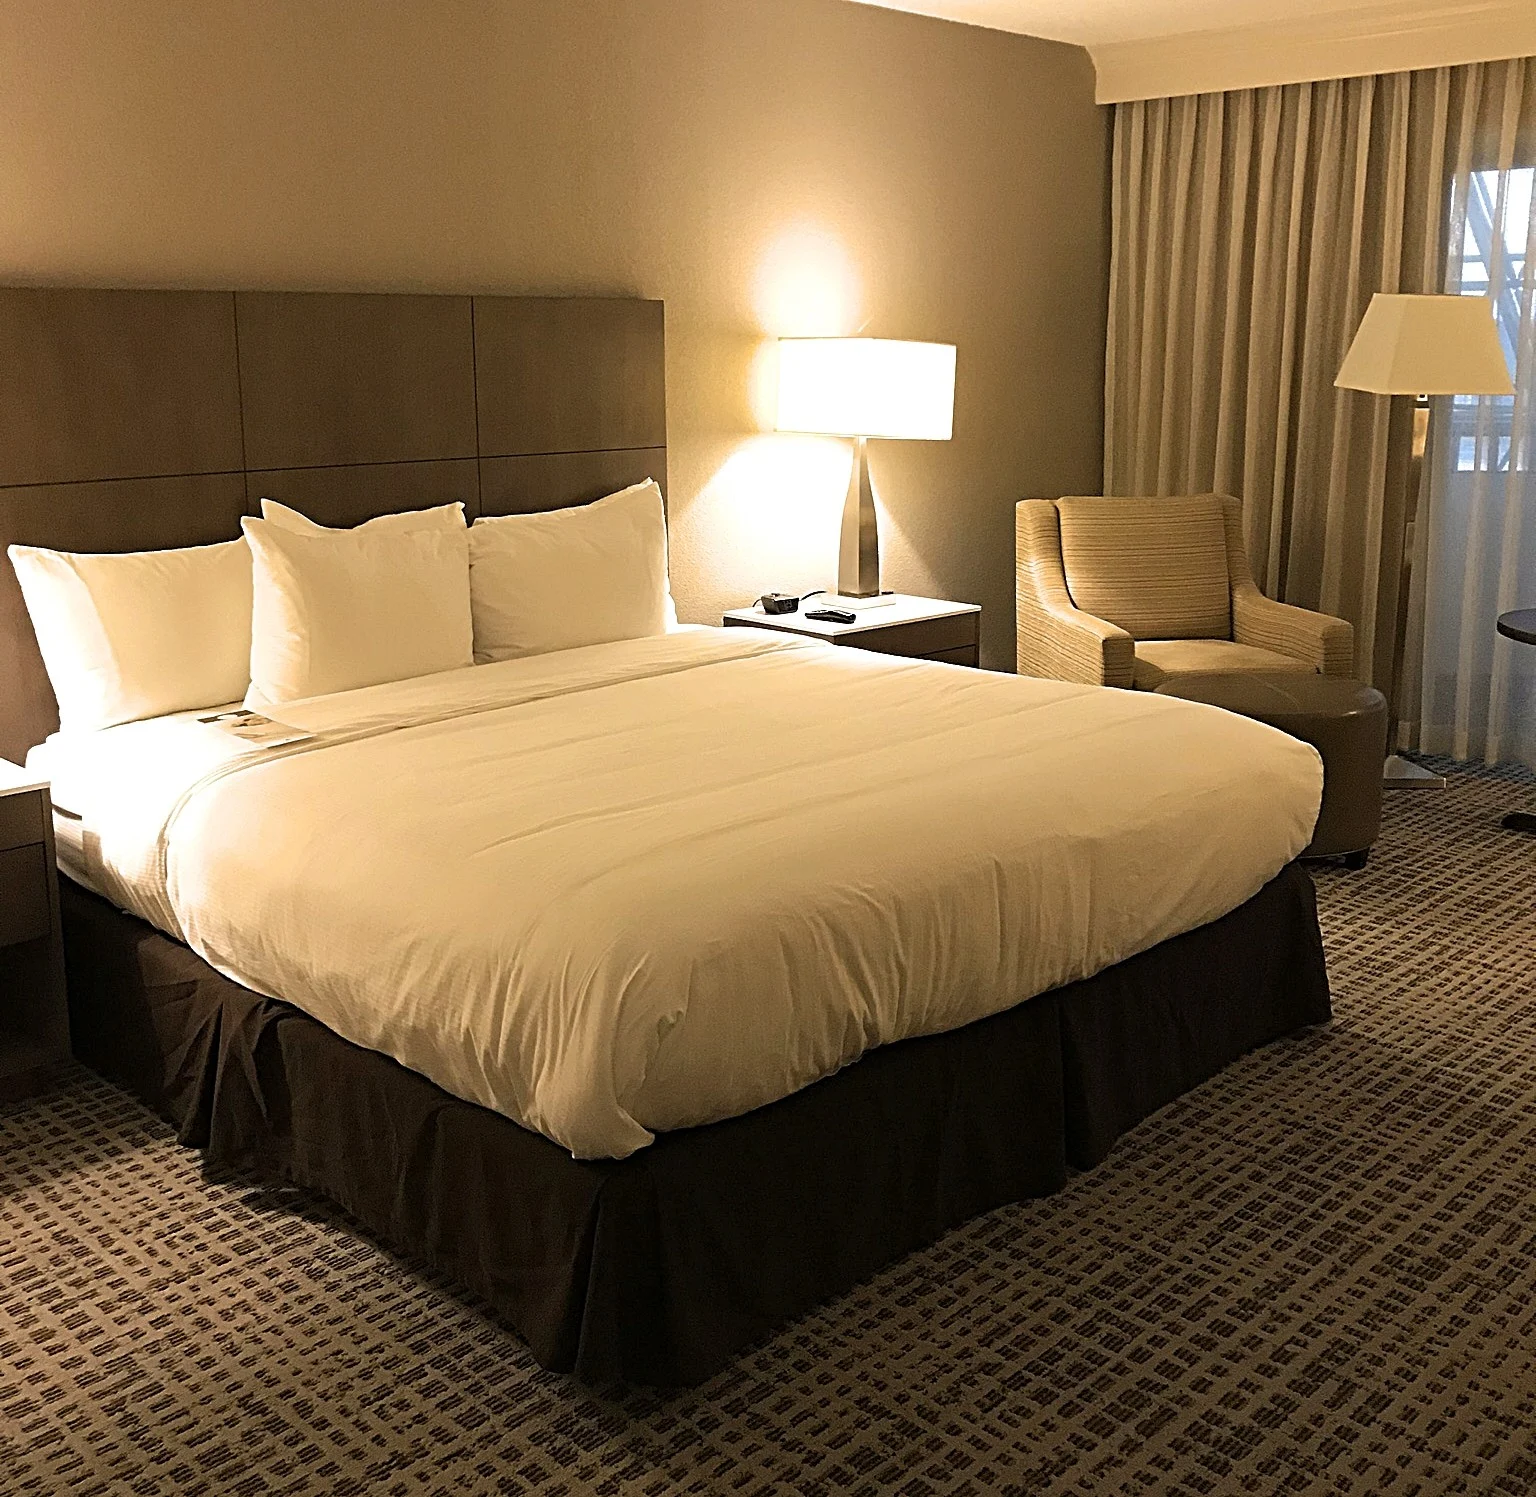 bed and sitting area in room at doubletree hotel